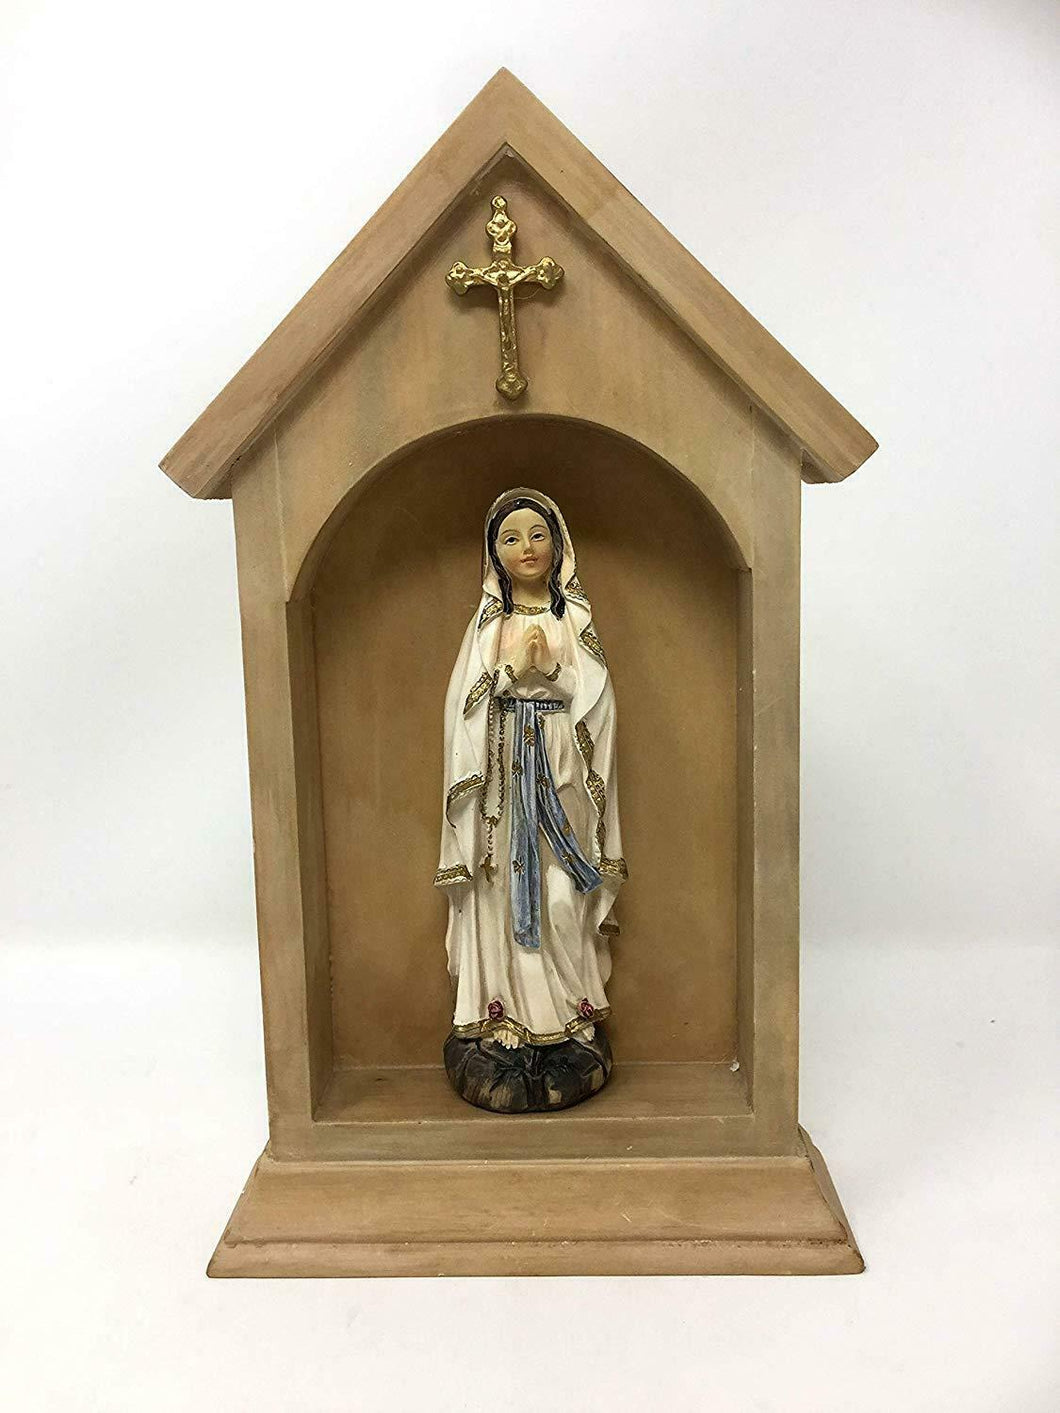 Blessed Virgin Mary Our Lady of Lourdes Statue Ornament Religious Figurine